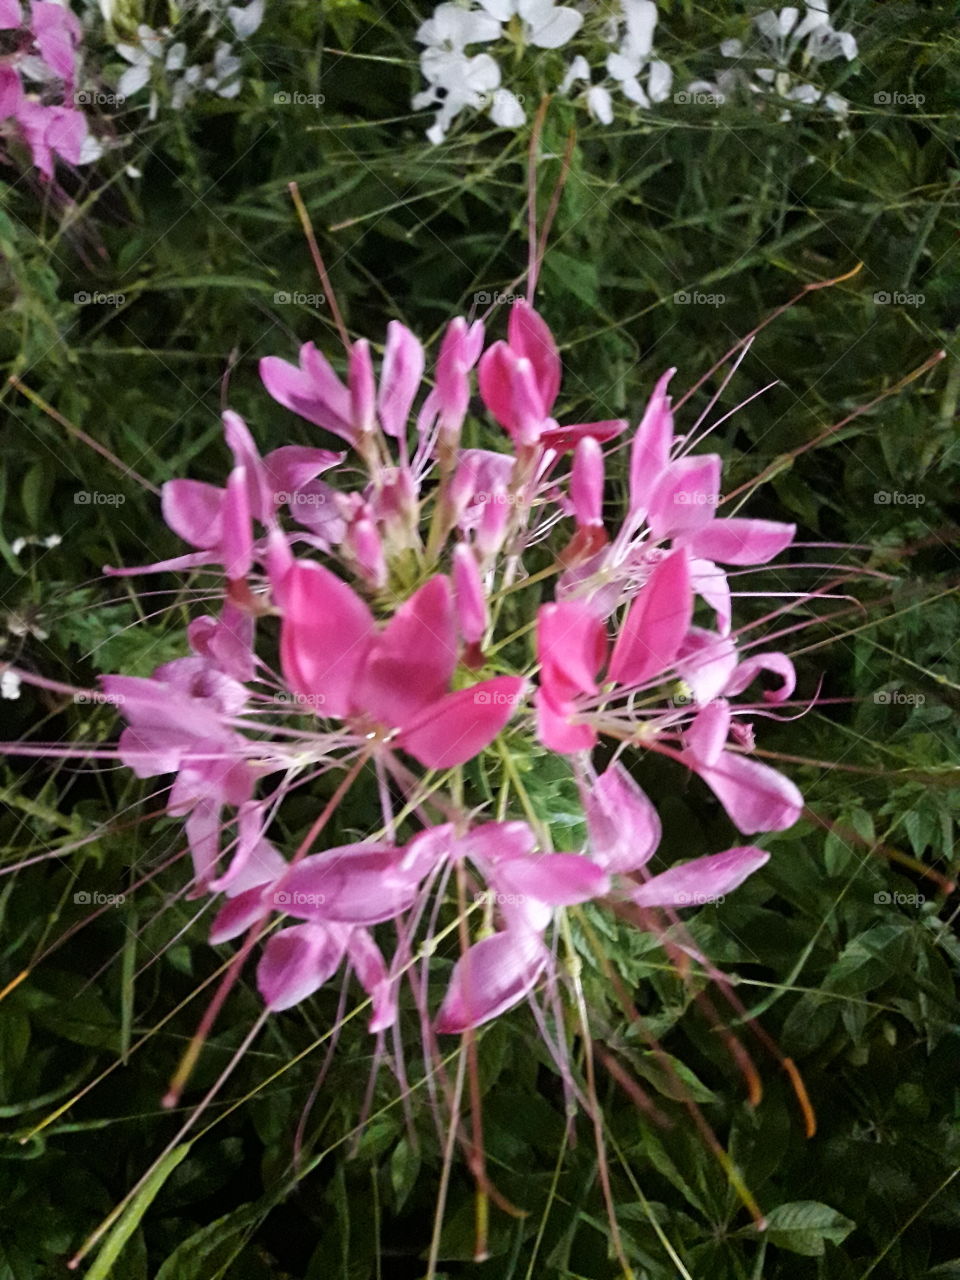 the special pink flora.